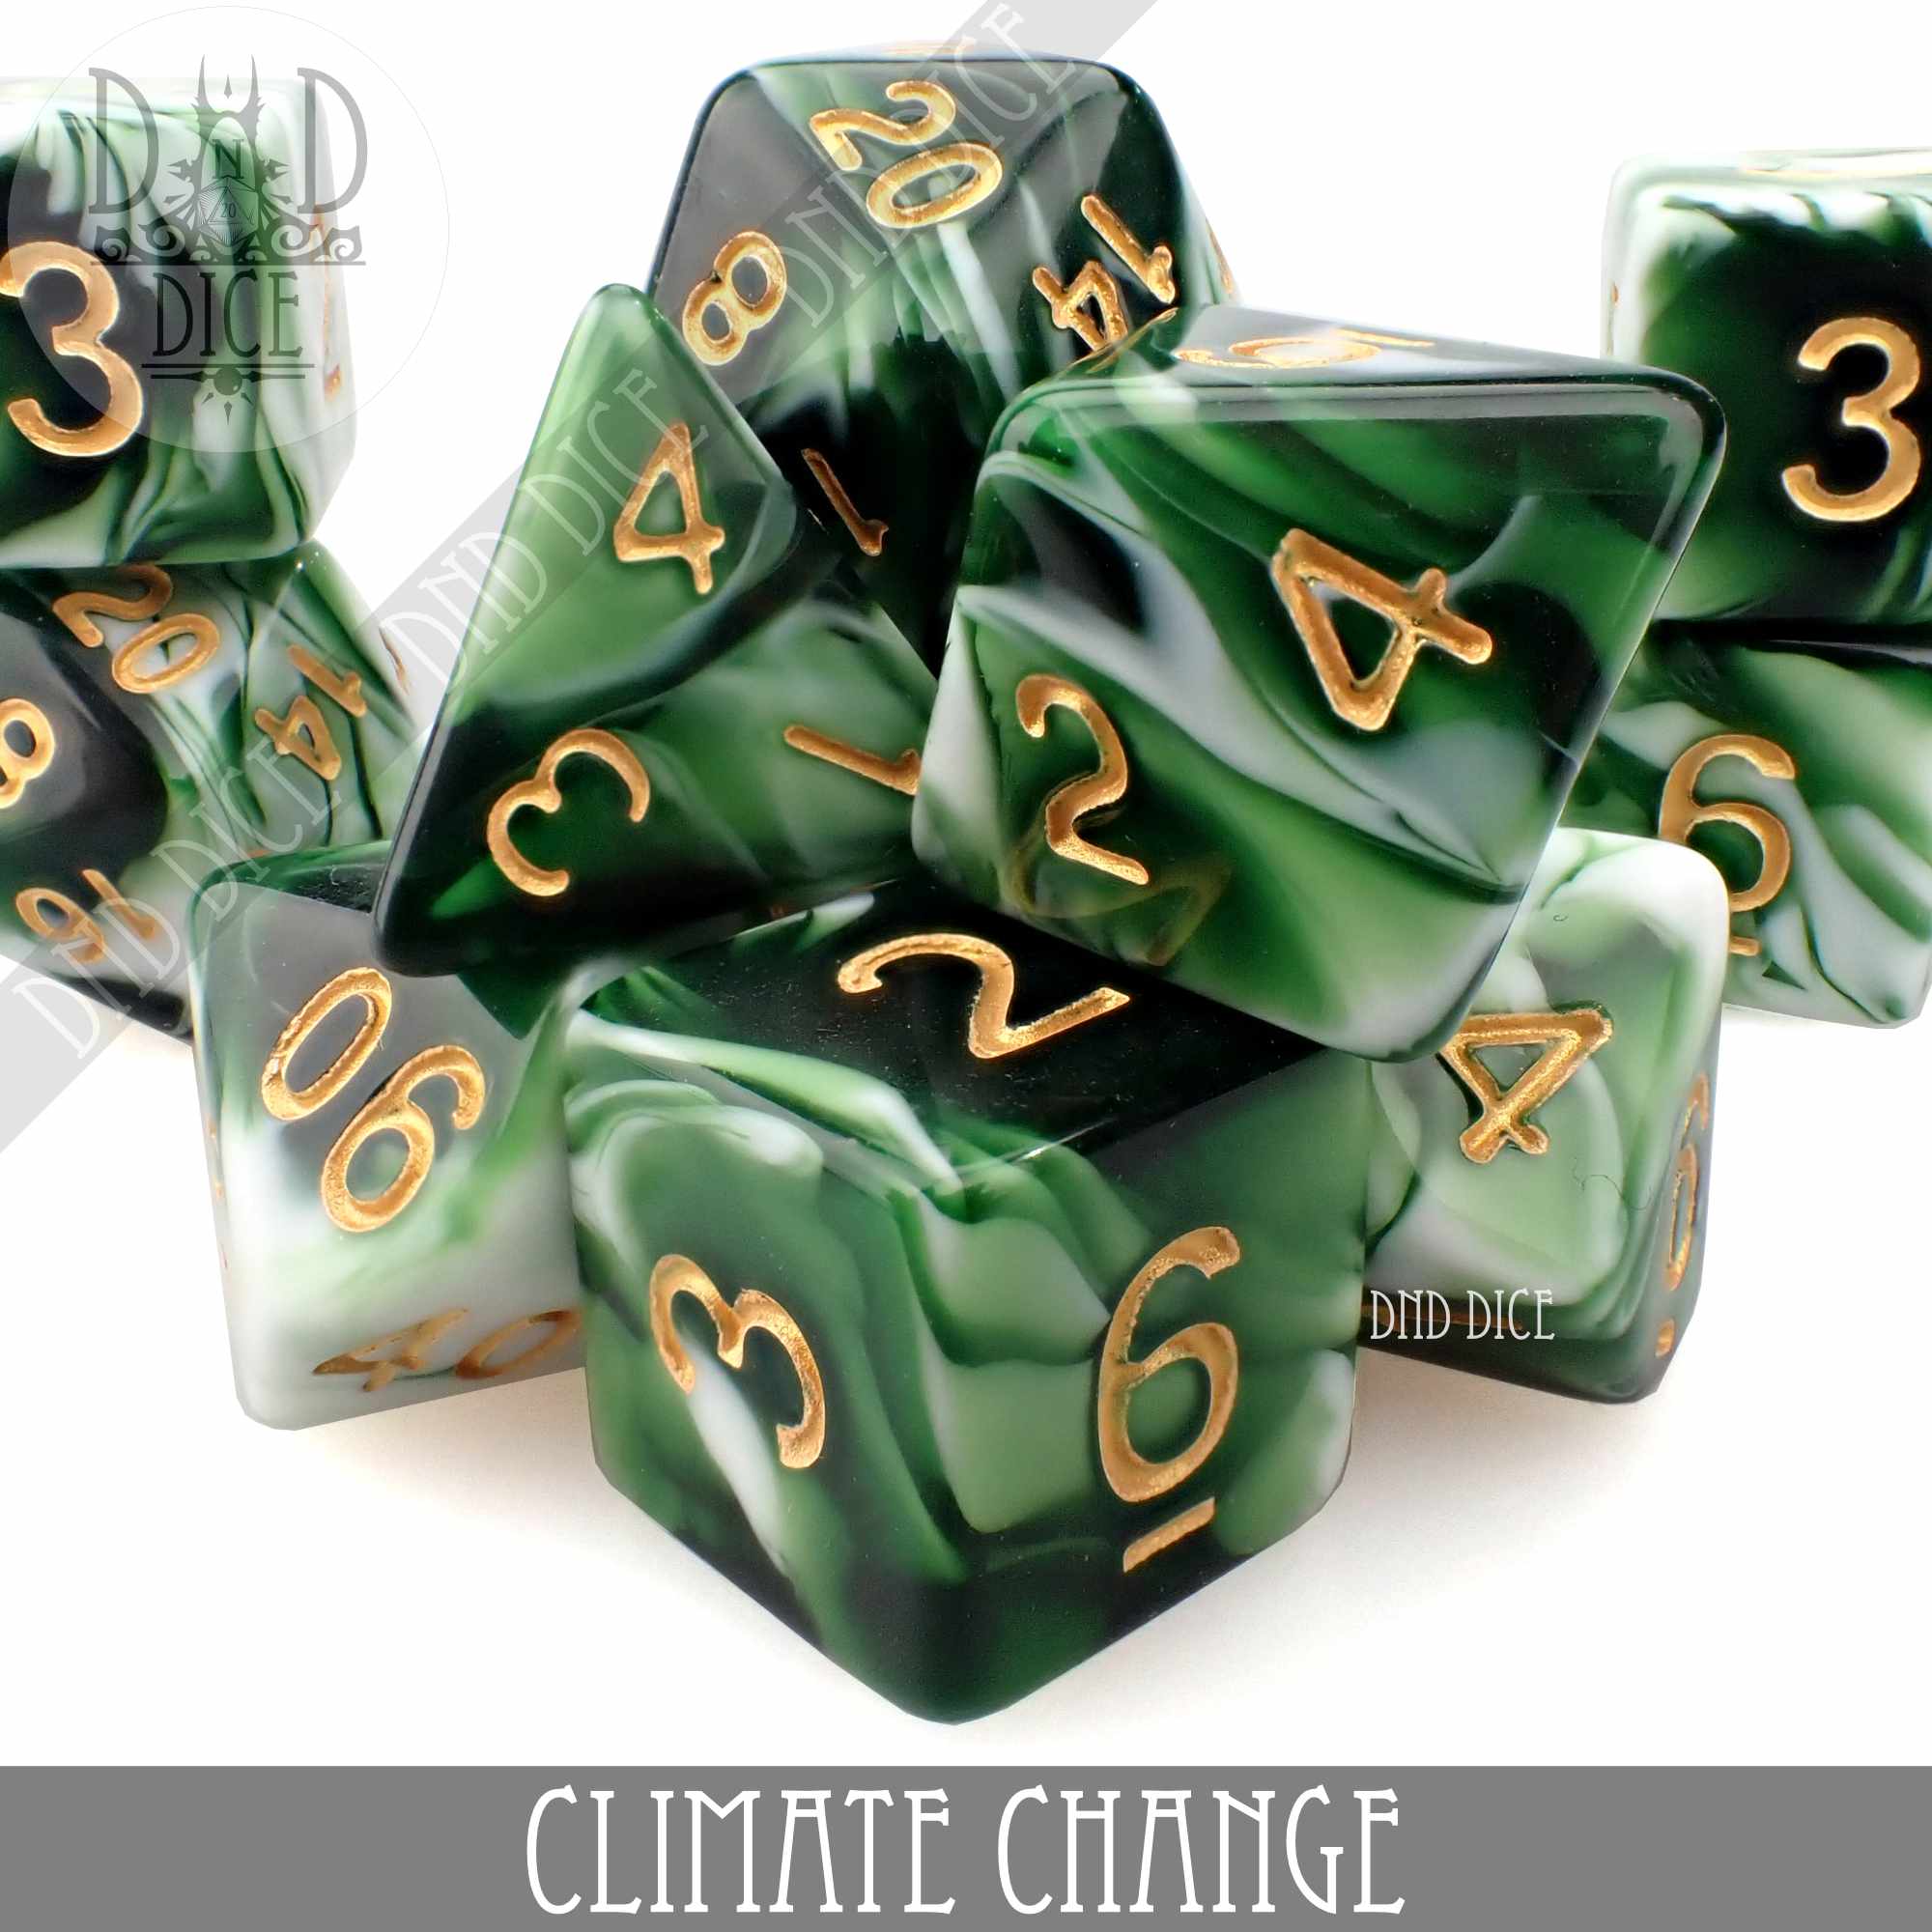 Climate Change 7 or 11